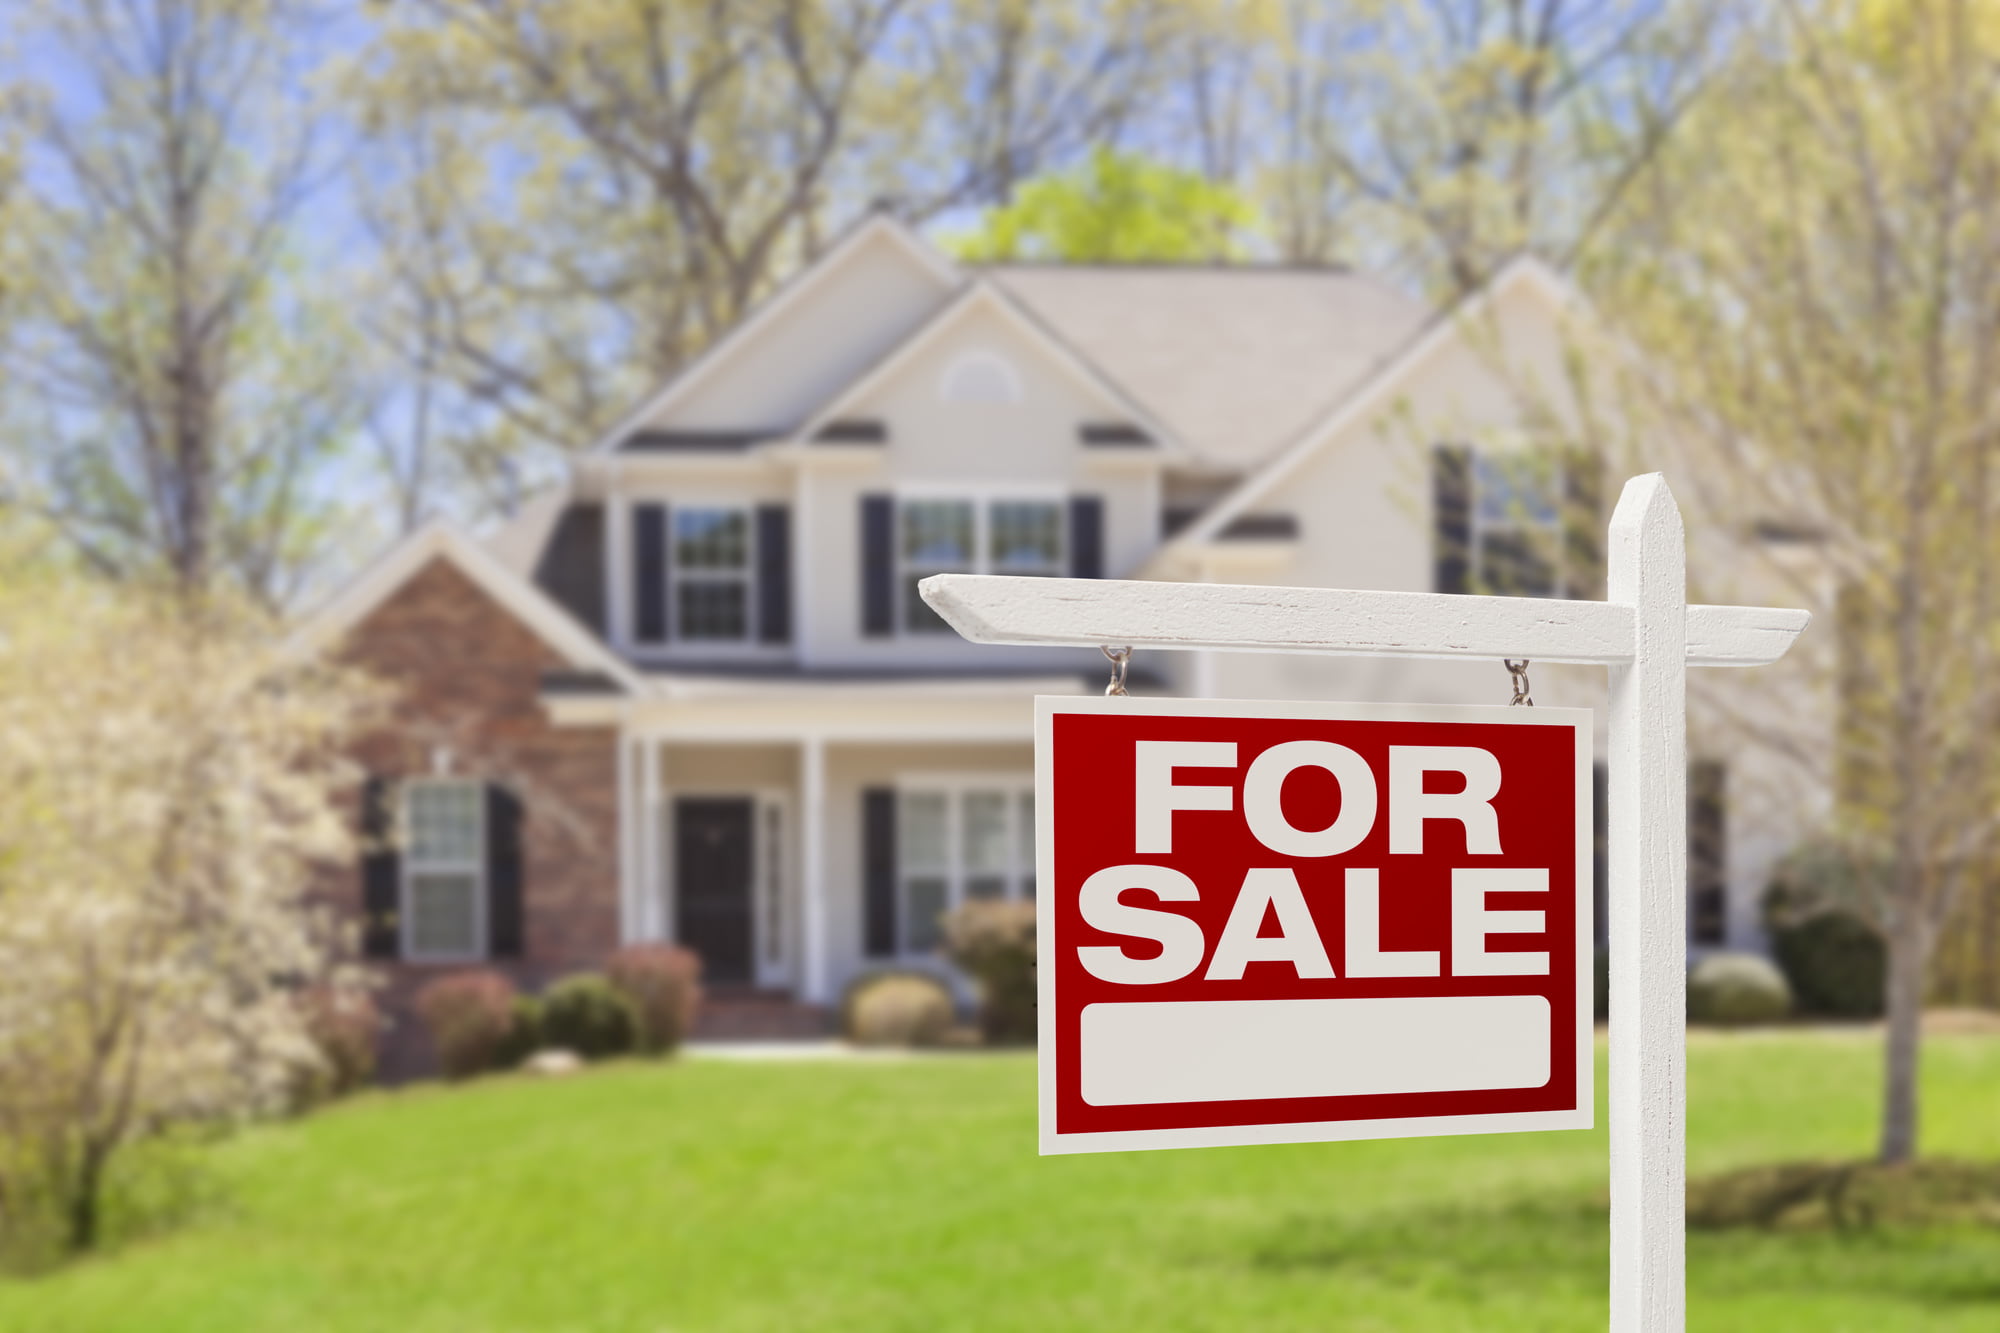 Are you thinking about selling your house but aren't sure where or how to begin? This is what you need to consider before selling a home.